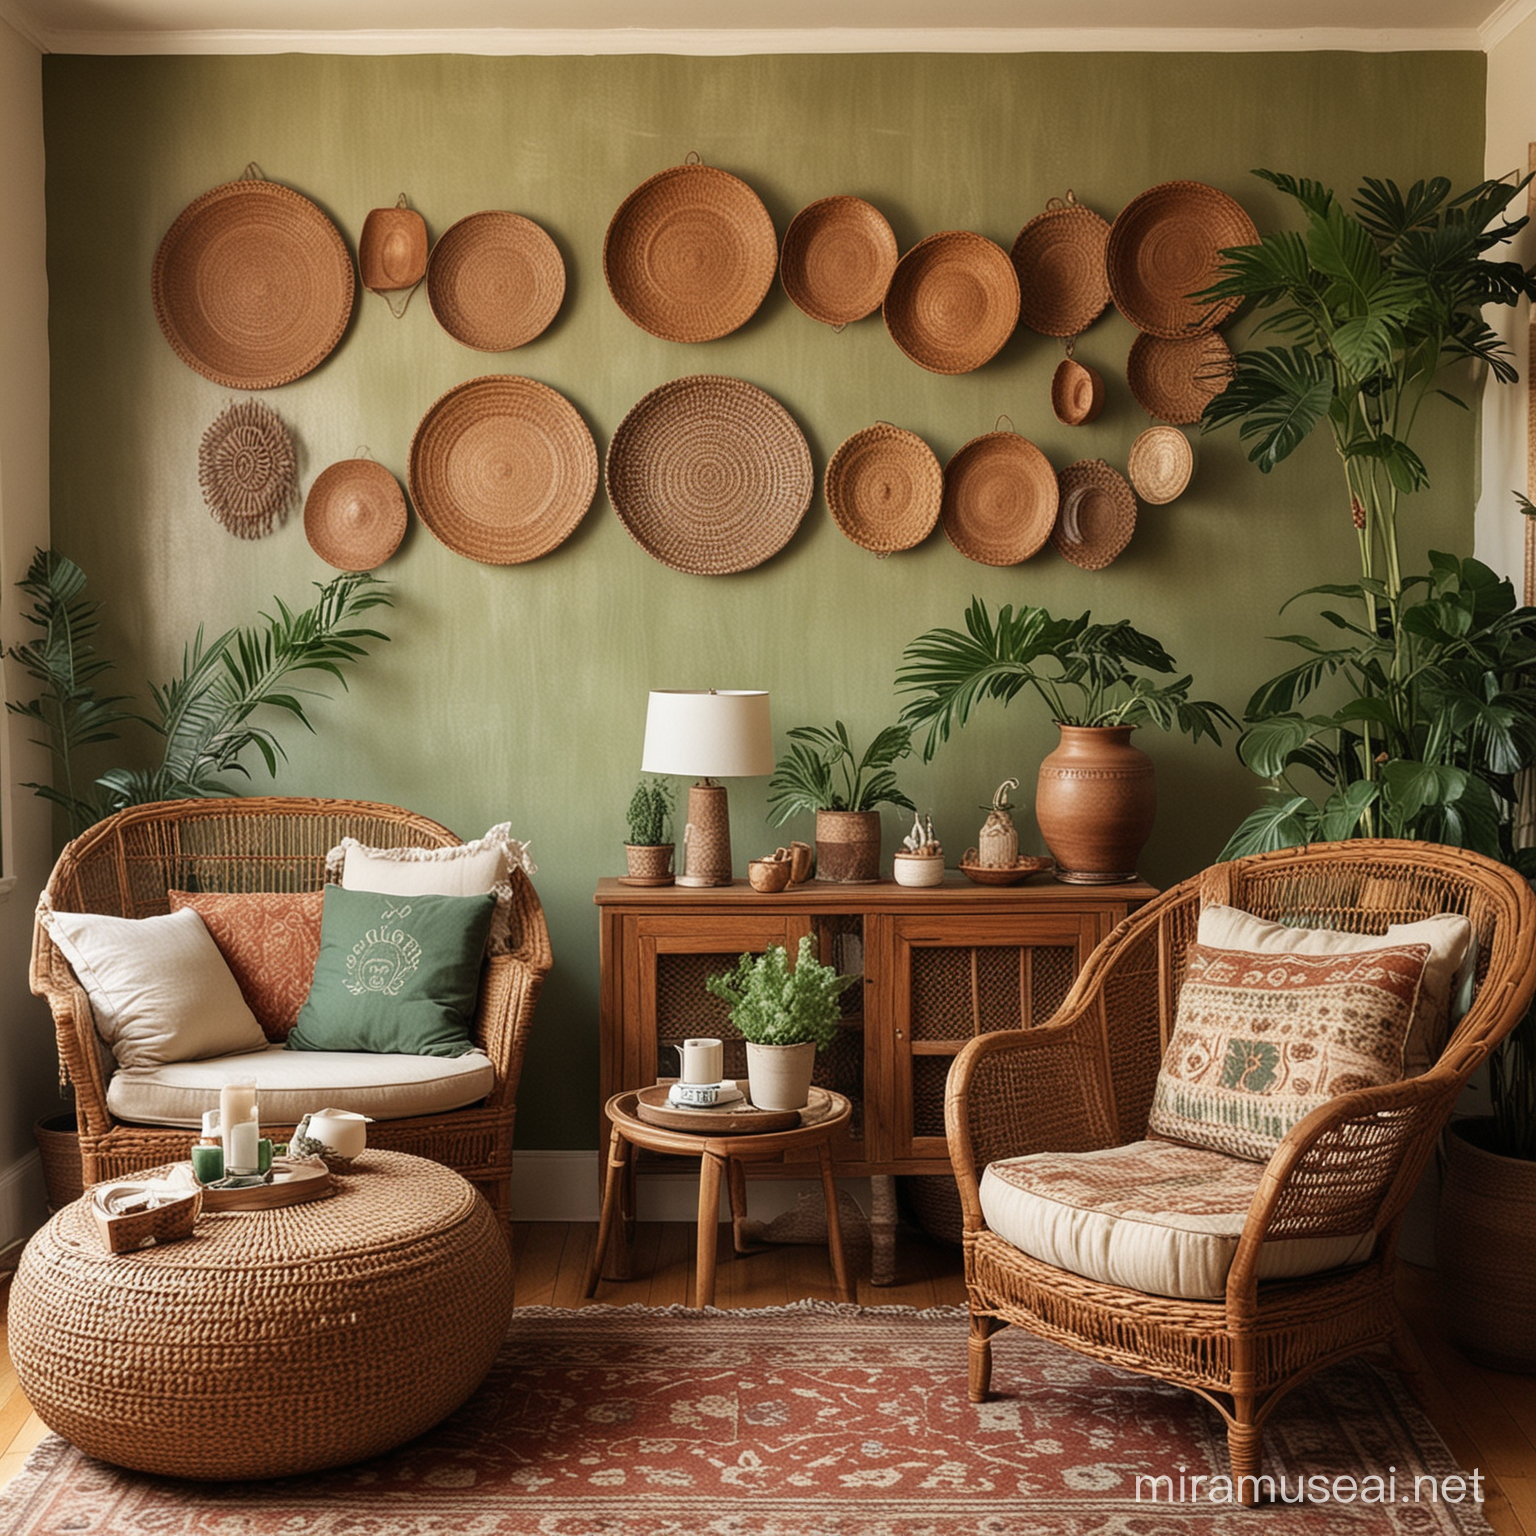 Bohemian Style Room with Earthy Tones and Wicker Wall Decor